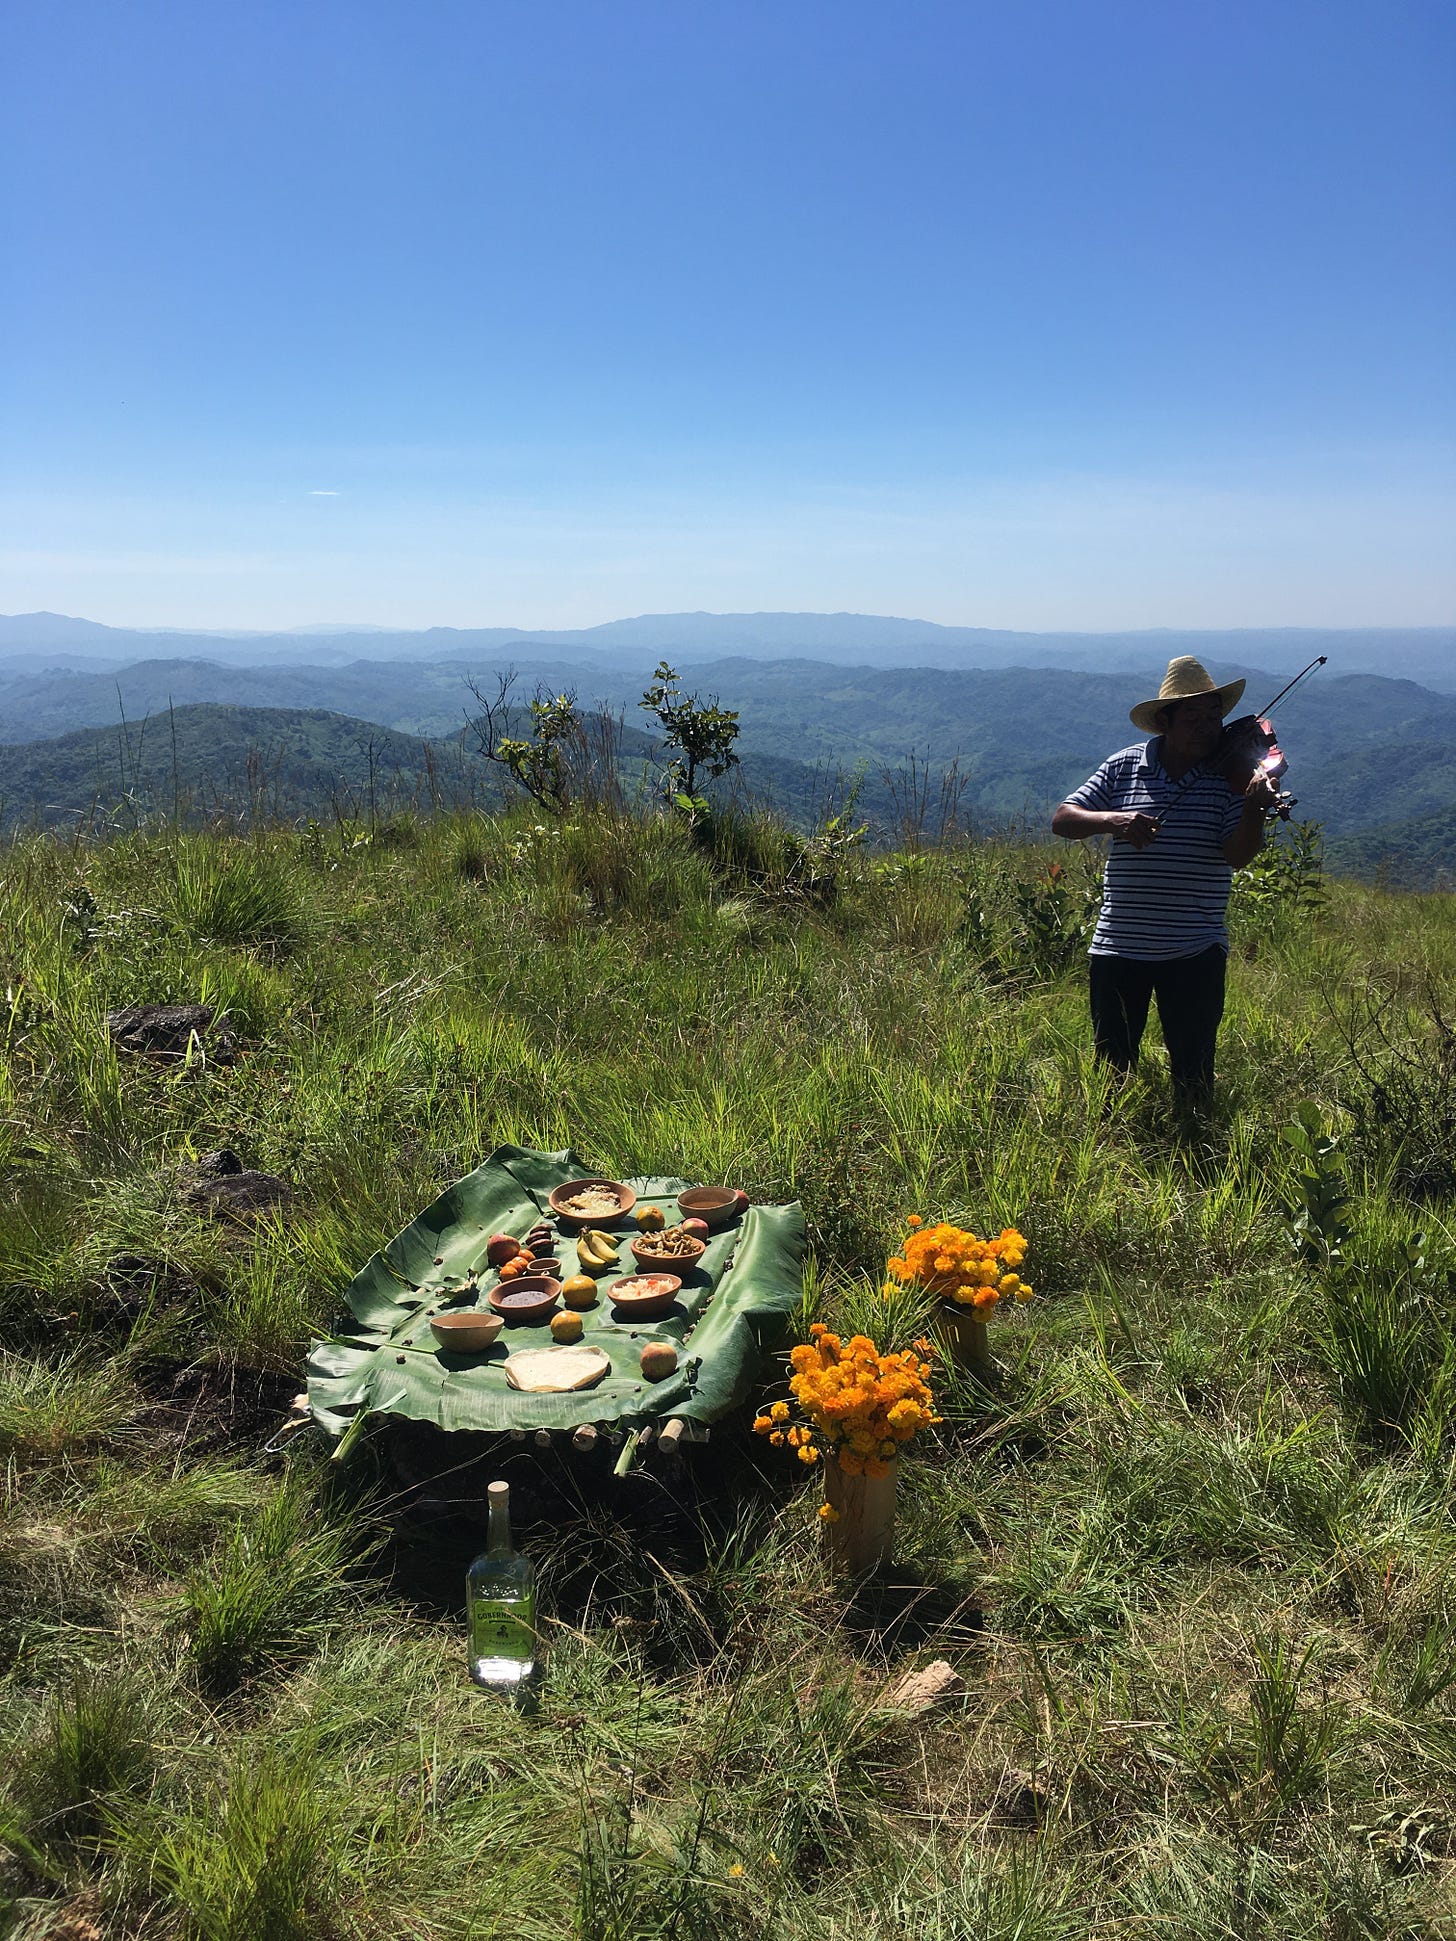 An offering on a low platform with two bunches of marigolds set out before it on the ground. In the mid-ground, a man in a hat with a violin is playing. Mountains are silhouetted in the background.